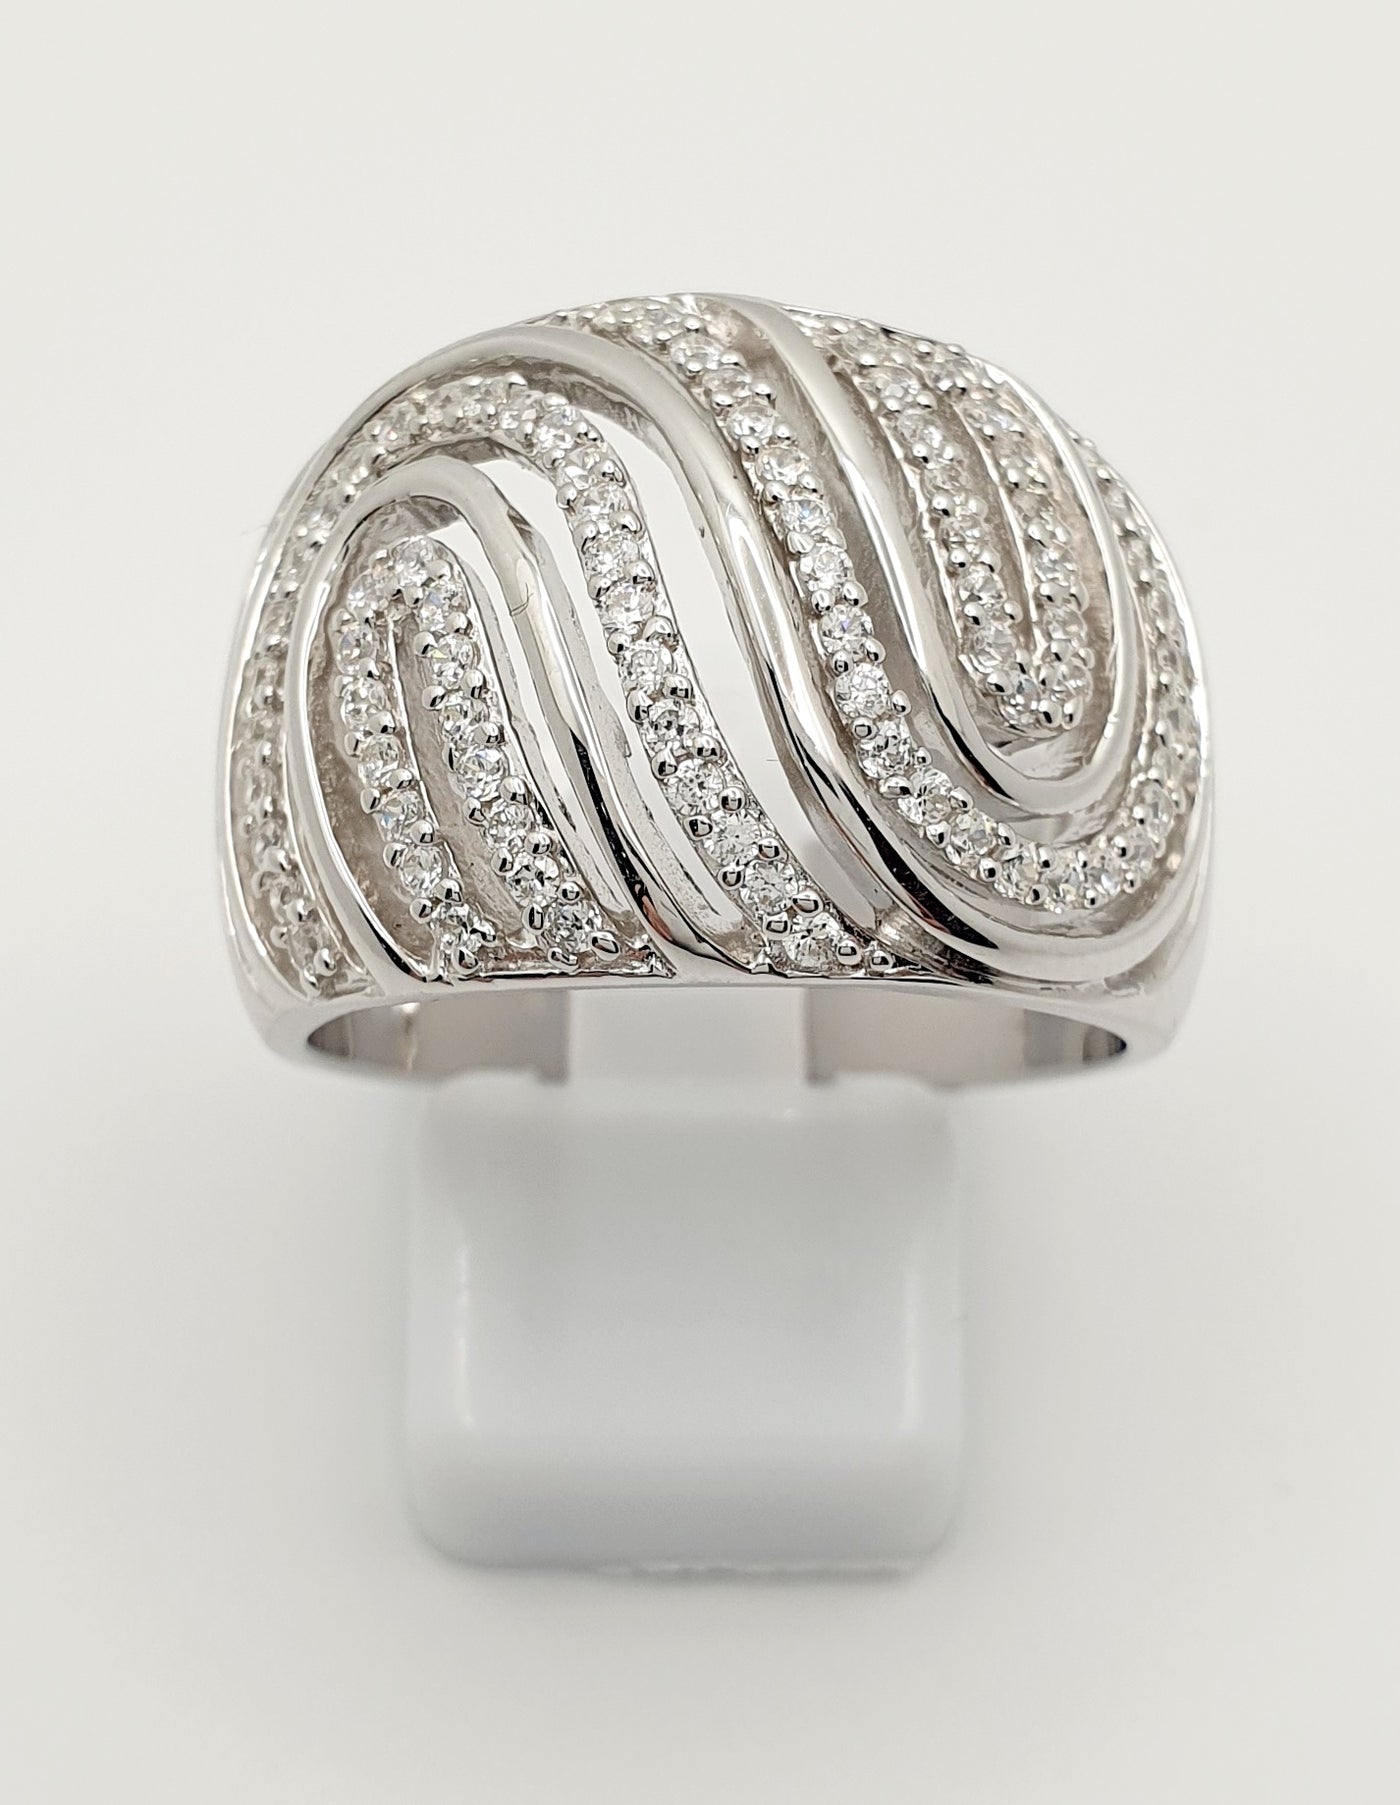 Sterling Silver, Wide Band Multi Swirl Ring w/ White Cubic Zirconias